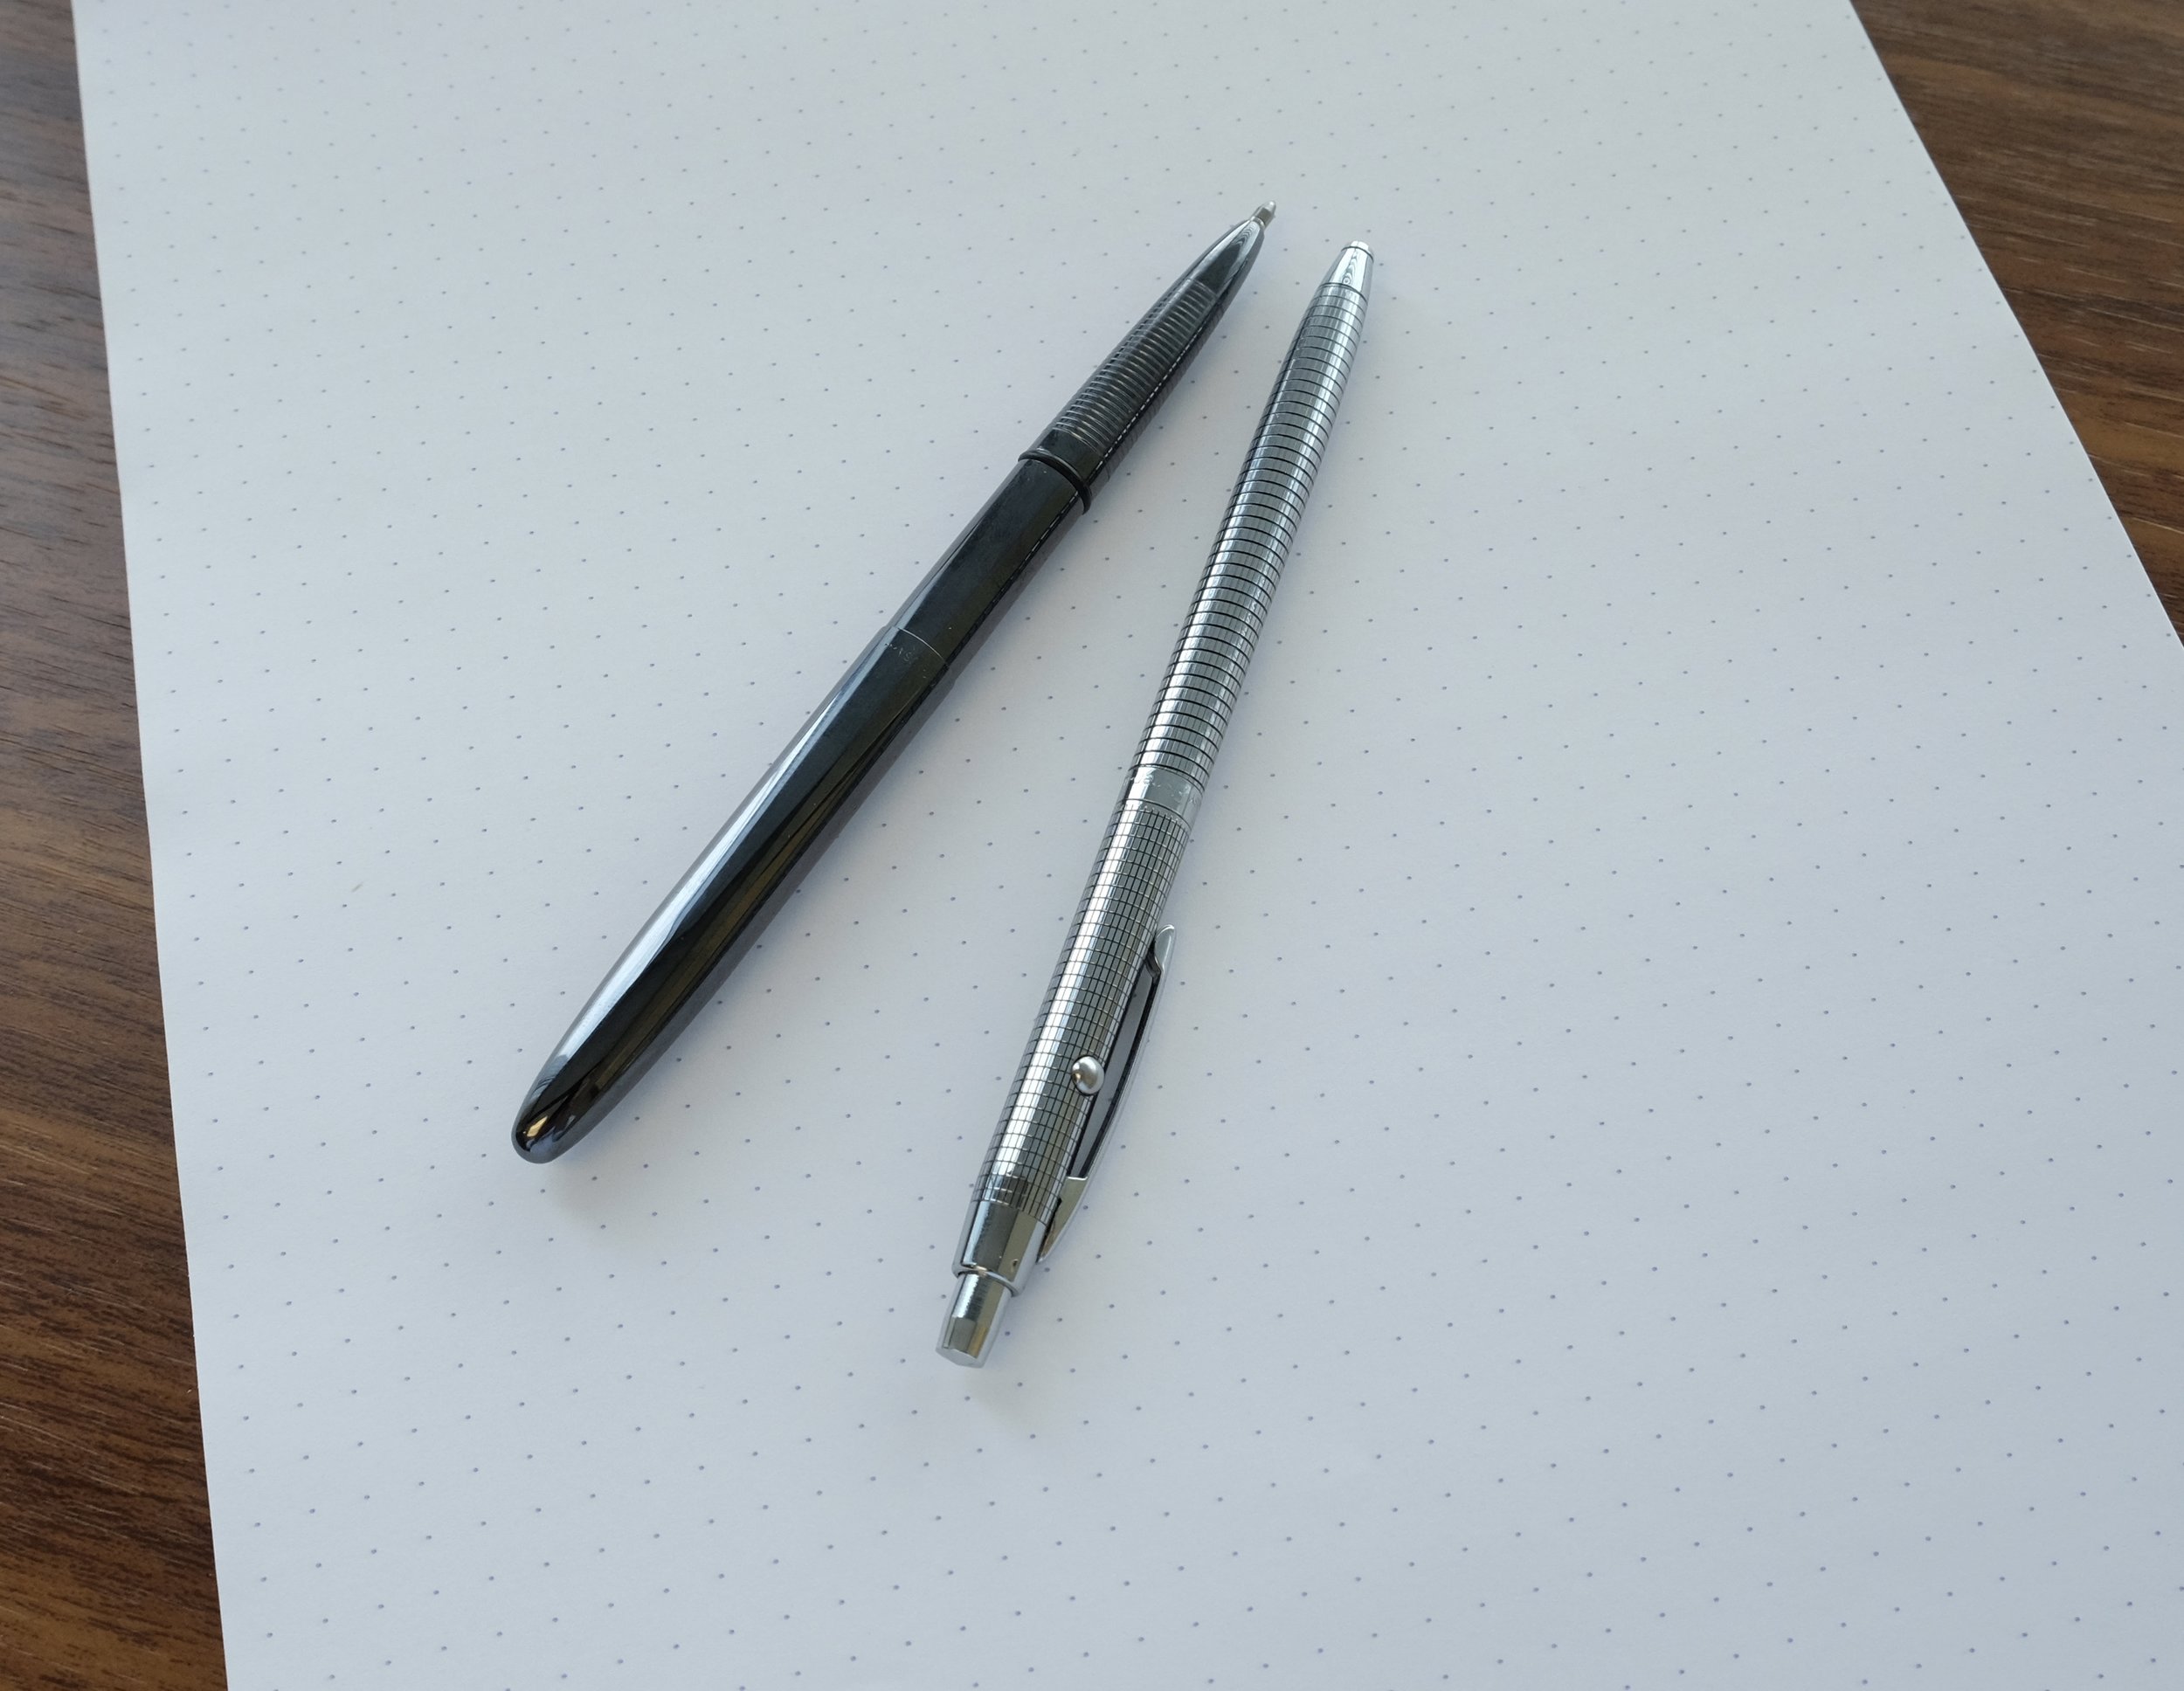 A Micro Review: On The Fly with a Fisher Space Pen